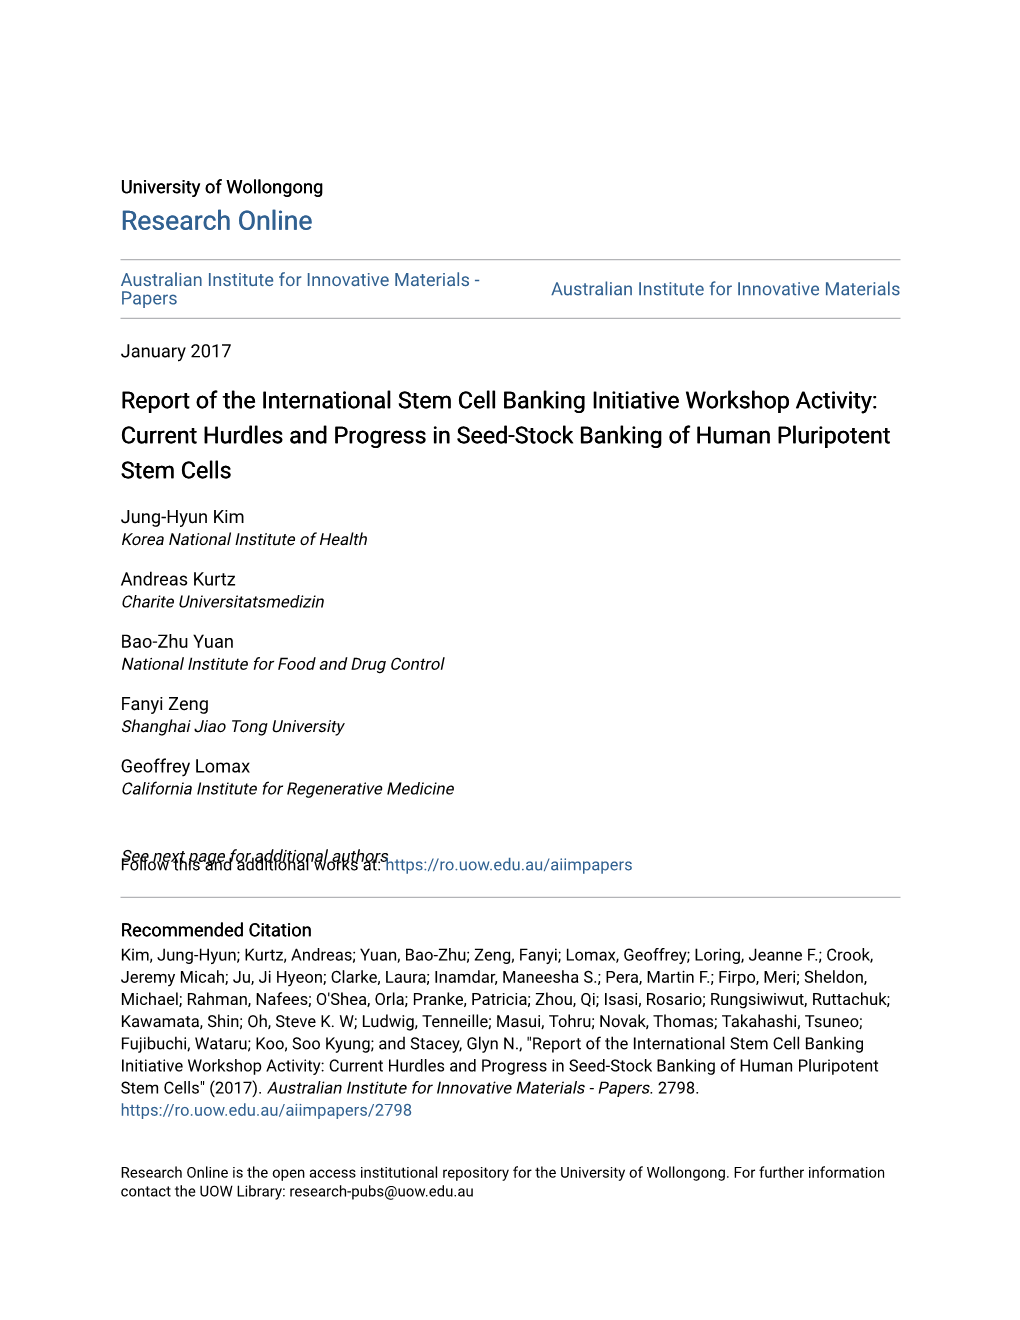 Report of the International Stem Cell Banking Initiative Workshop Activity: Current Hurdles and Progress in Seed-Stock Banking of Human Pluripotent Stem Cells